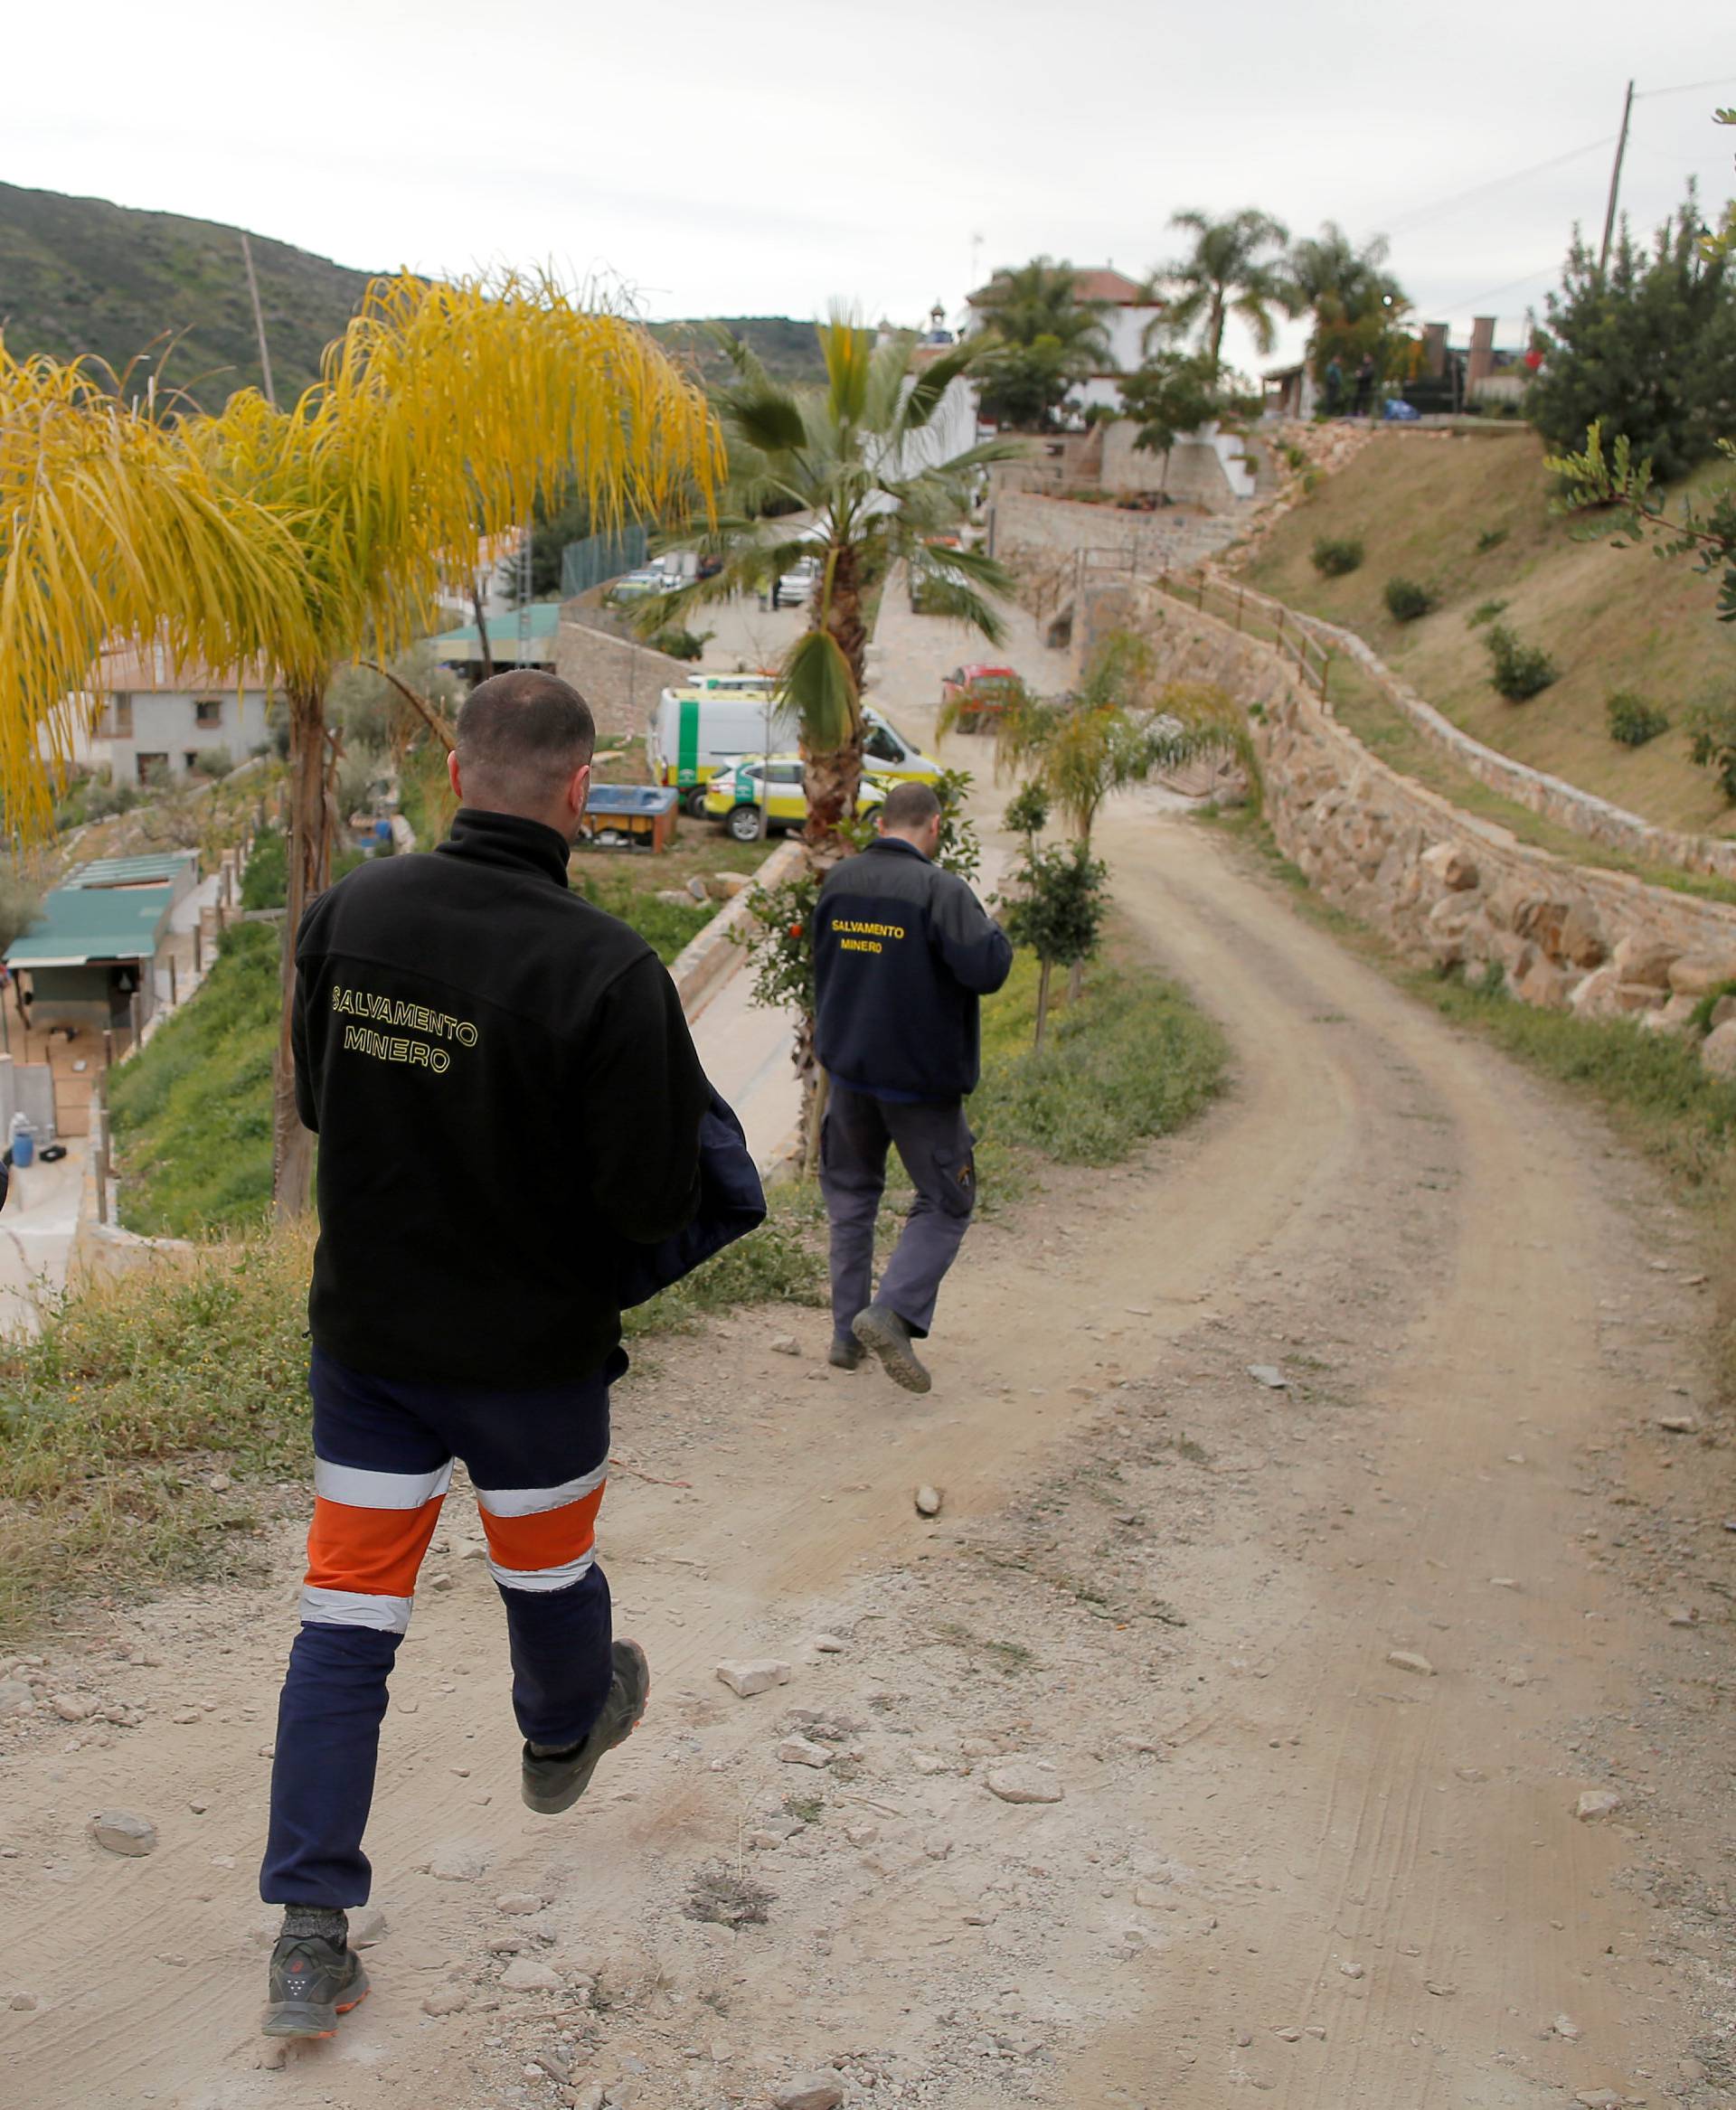 A miner rescue team arrives to the control center at the area where Julen, a Spanish two-year-old boy, fell into a deep well nine days ago when the family was taking a stroll through a private estate, in Totalan